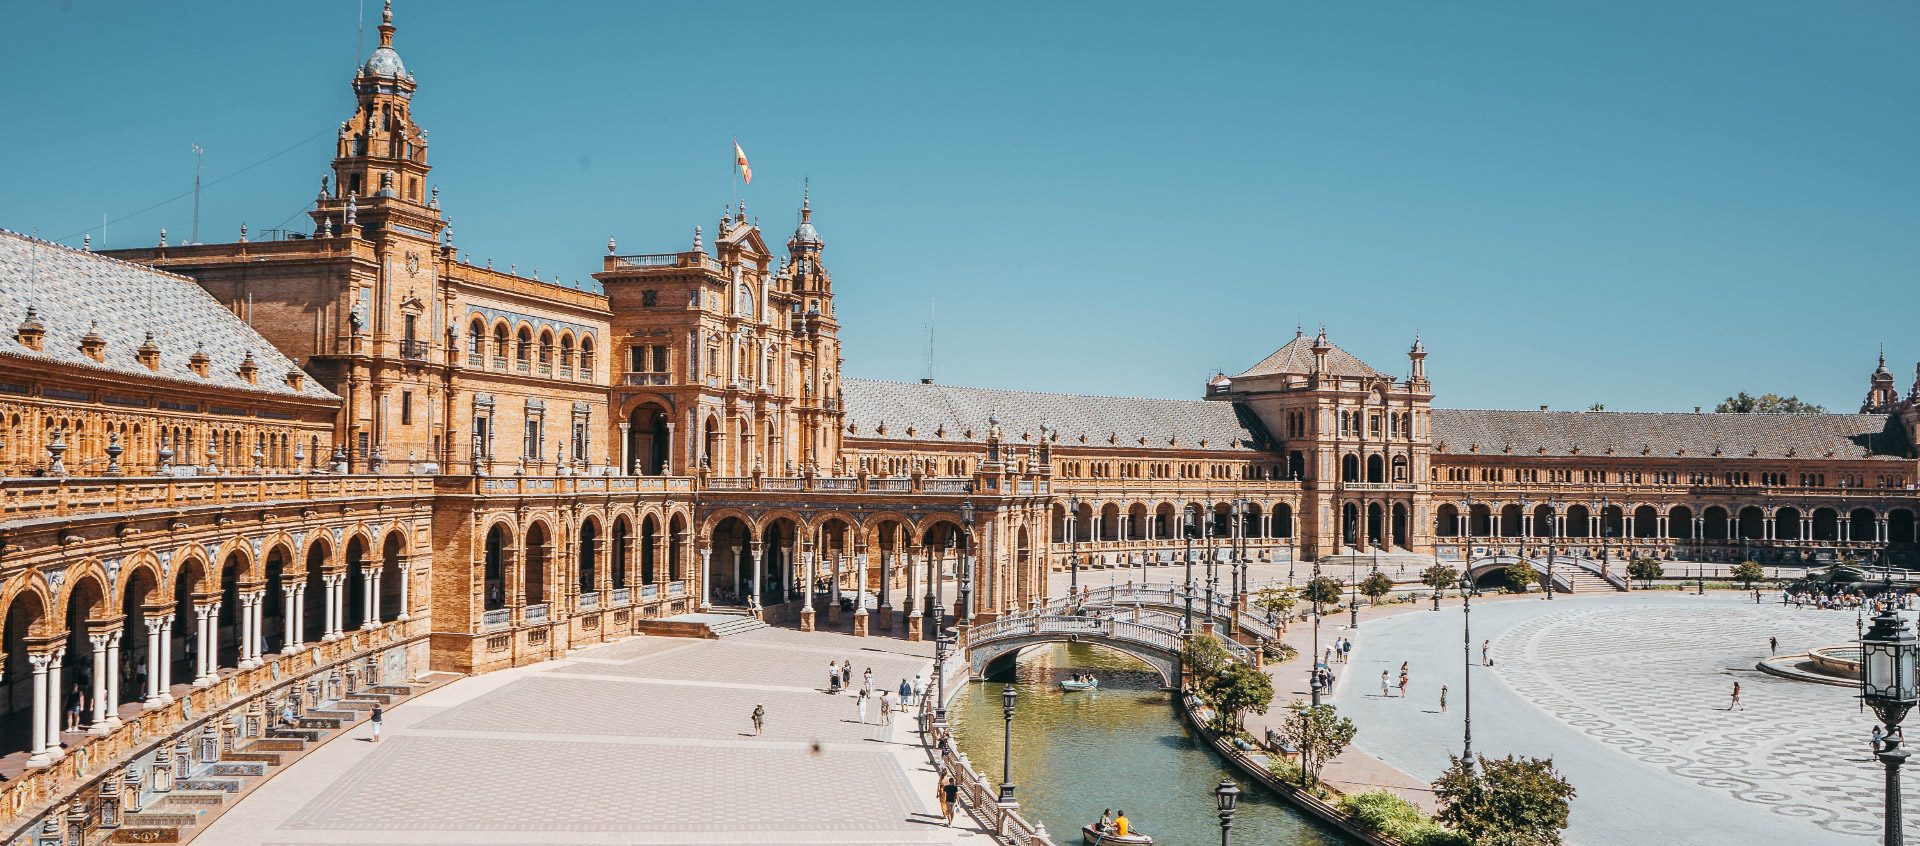 Plaza de España and its monumental building around as you would enjoy it in our private tour.